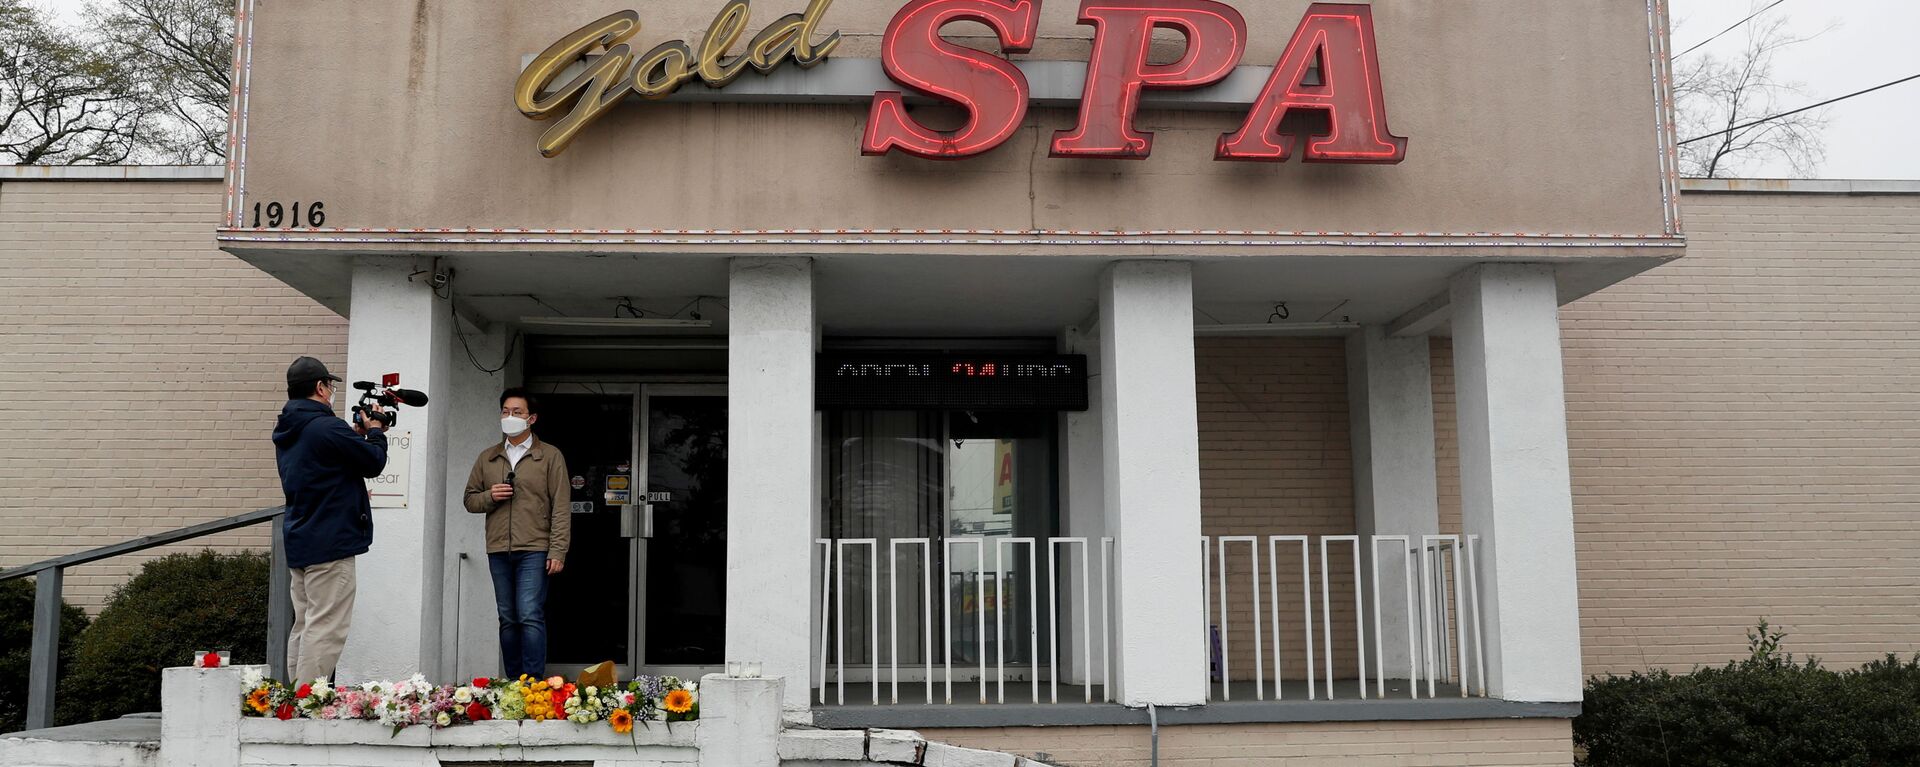 Flowers are laid in front of Gold Spa following the deadly shootings in Atlanta, Georgia, U.S. March 17, 2021 - Sputnik International, 1920, 18.03.2021